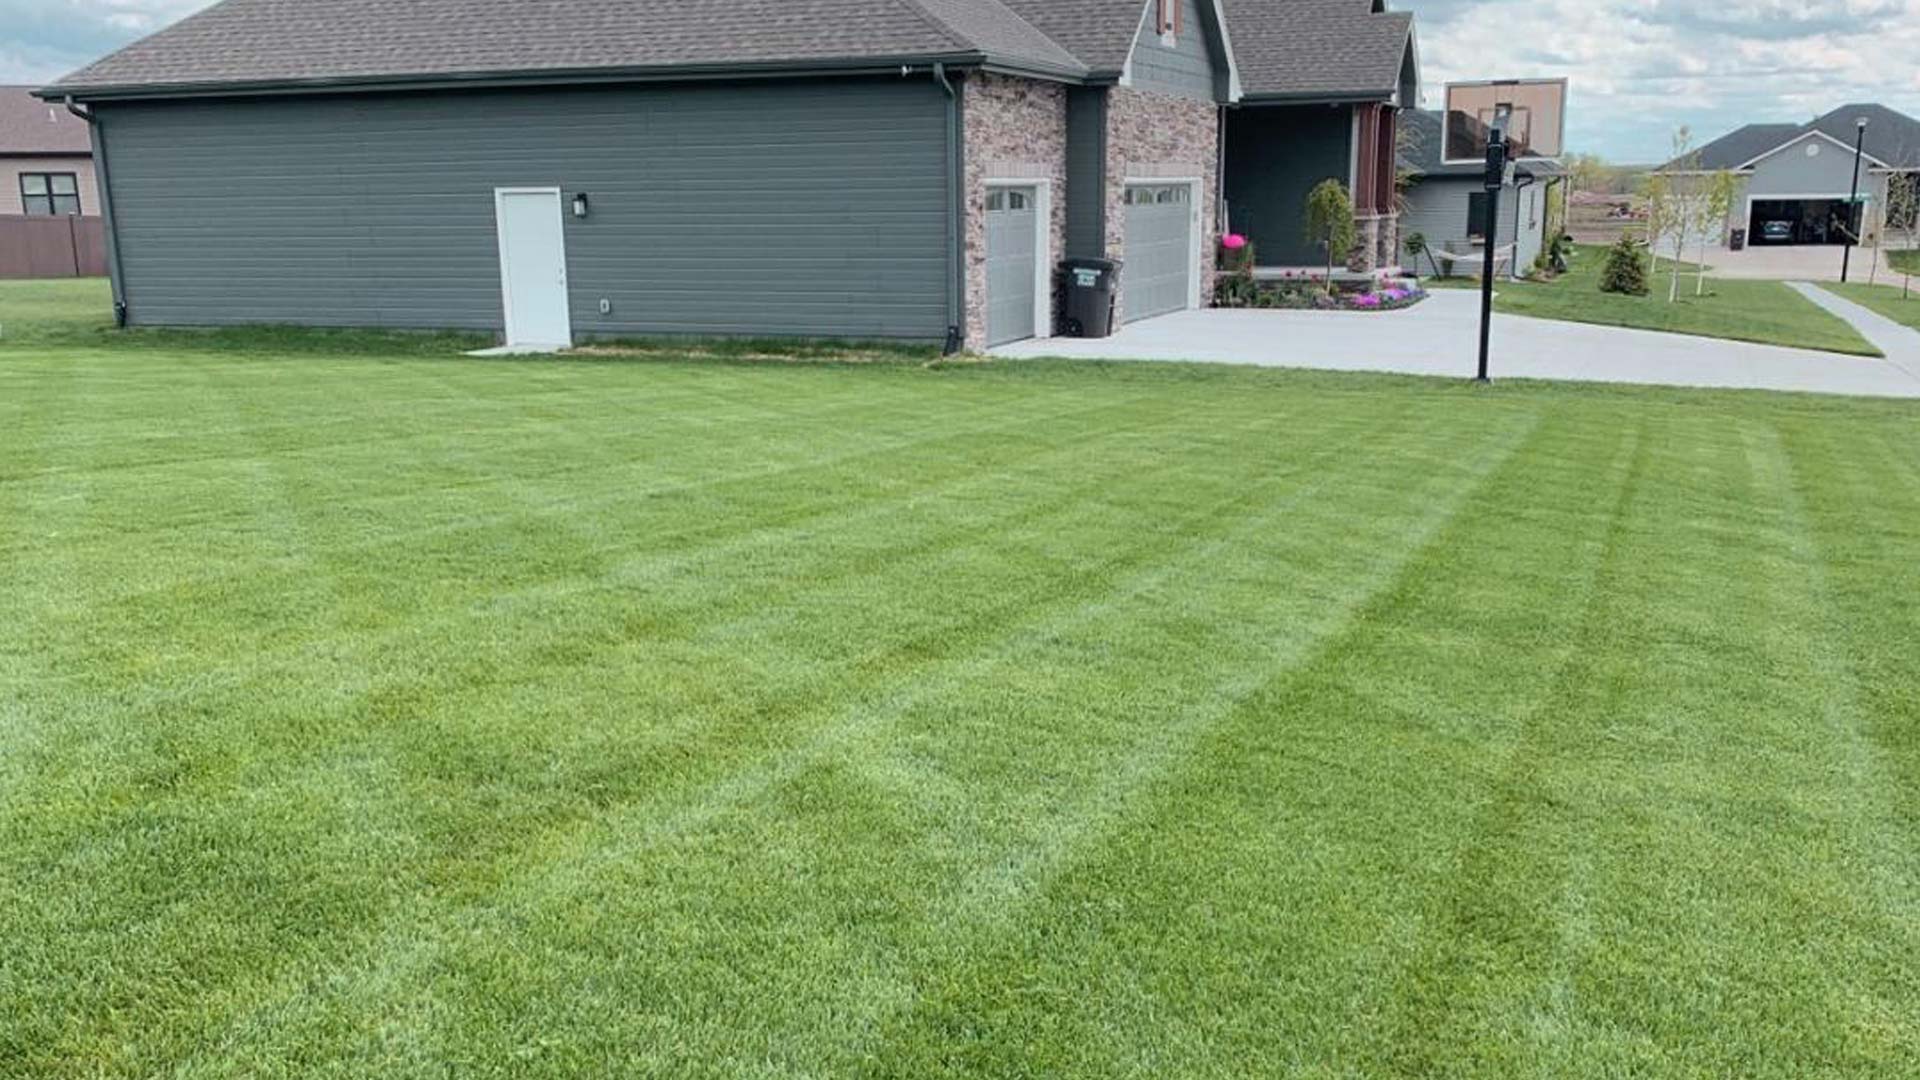 Recently mowed and treated lawn at a home in Lancaster.